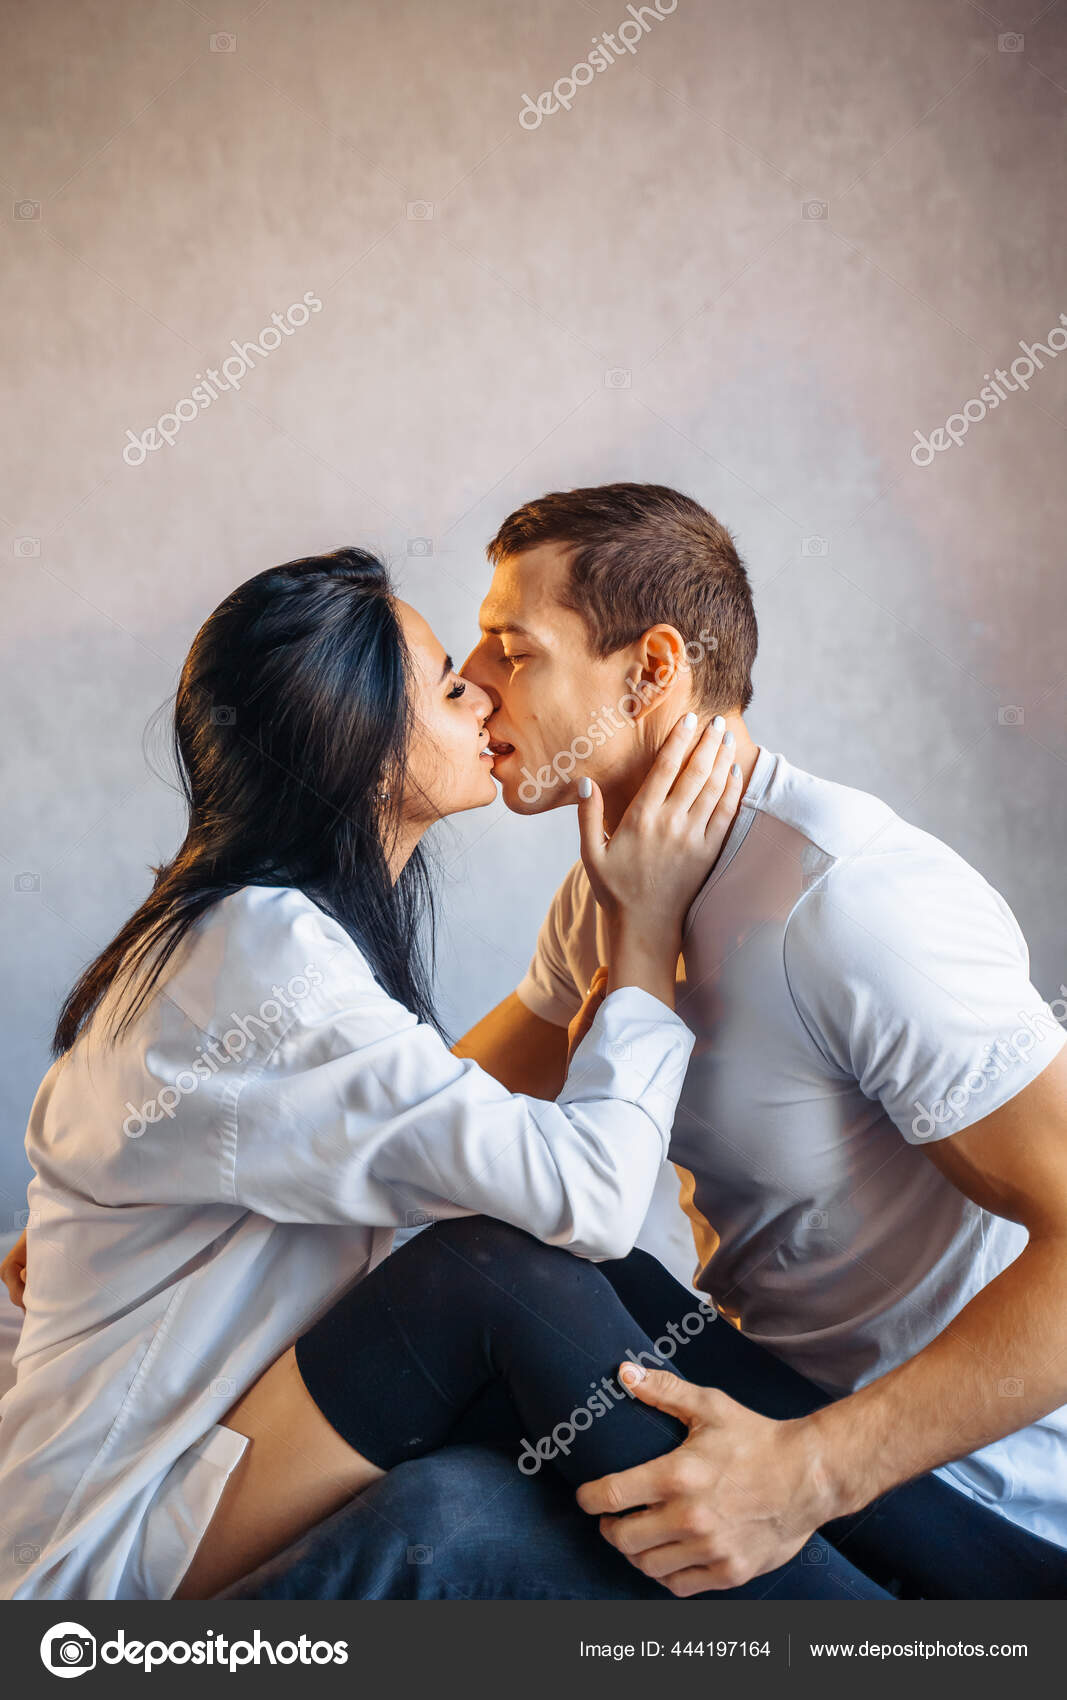 Attractive Young Couple Lovers Having Sex Home Bed Bright Room Stock Photo by ©dariaagaf 444197164 image pic